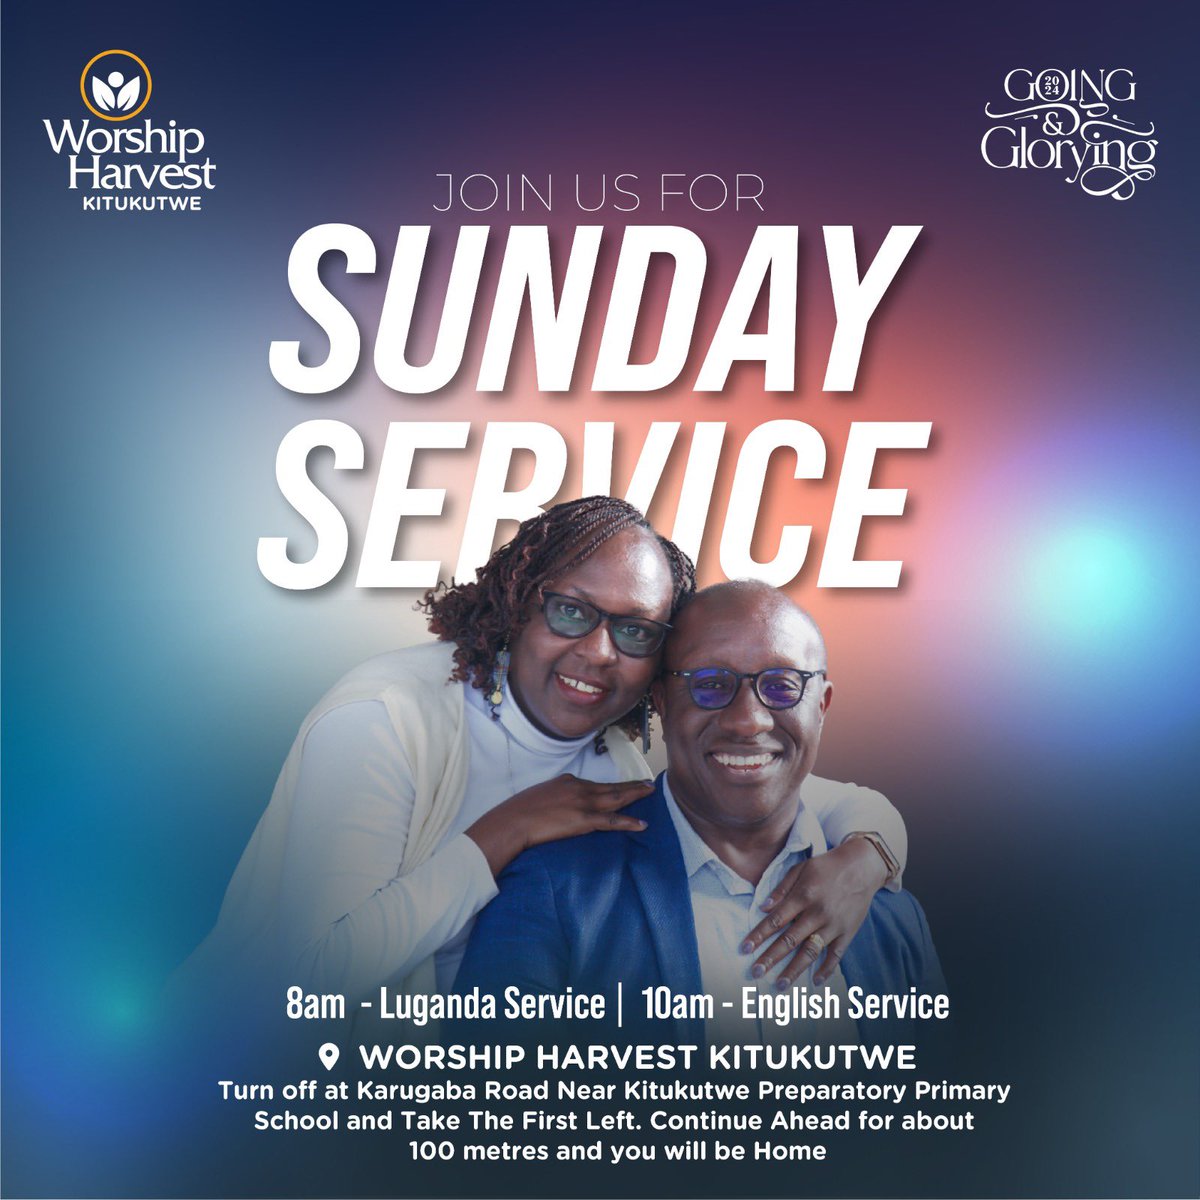 Join us this morning for some warmth, joy, uplifting worship and an amazing word from God at @worship_harvest Kitukutwe